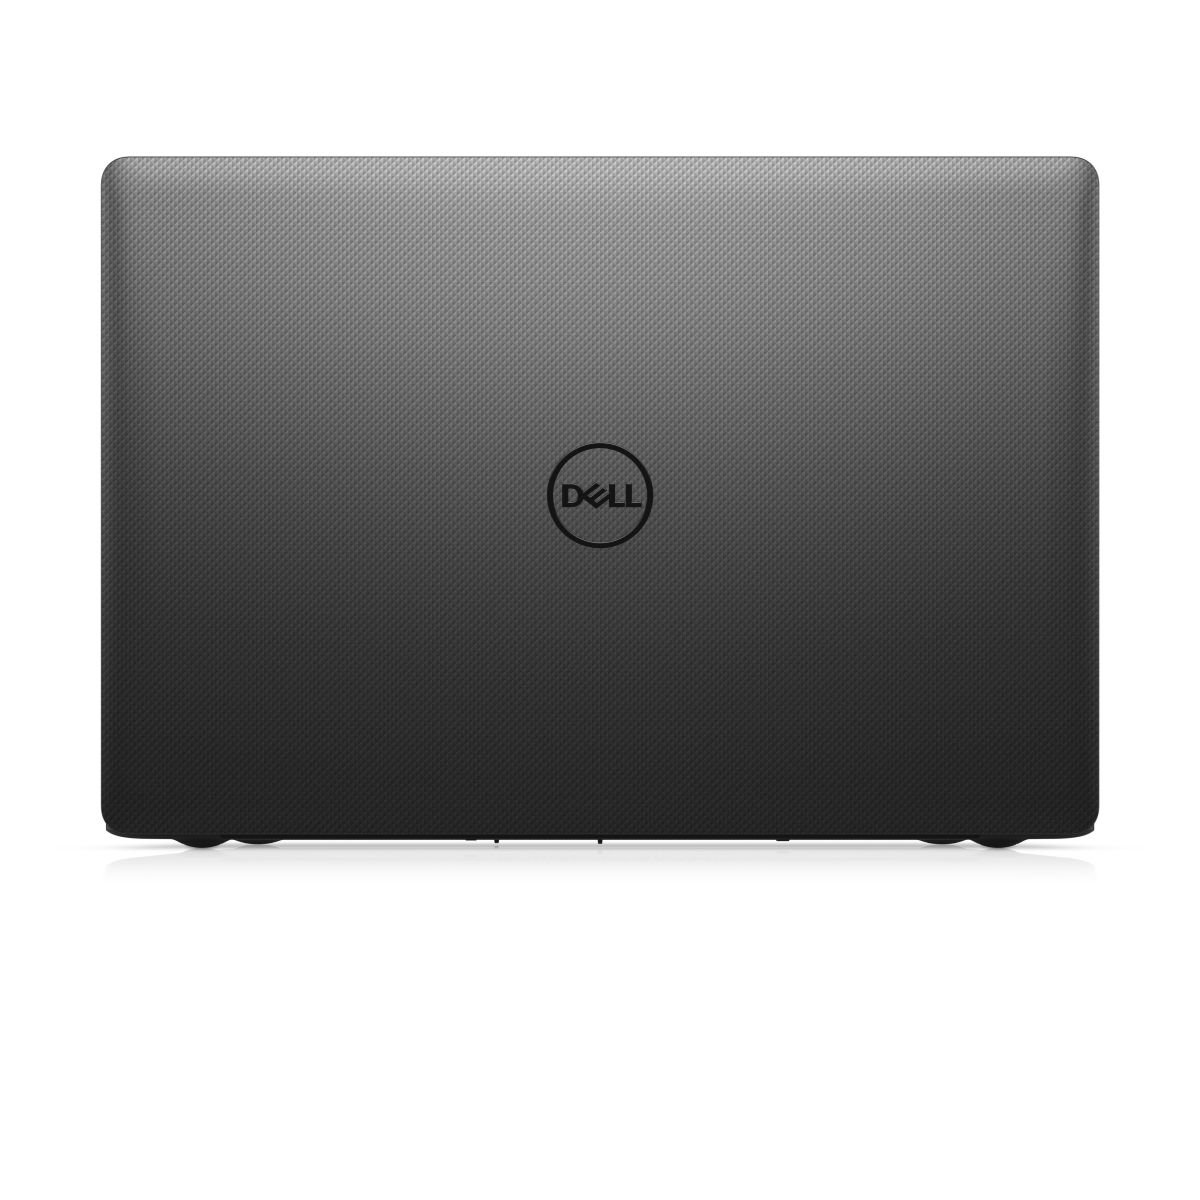 DELL Vostro 3580 - GRXDG laptop specifications